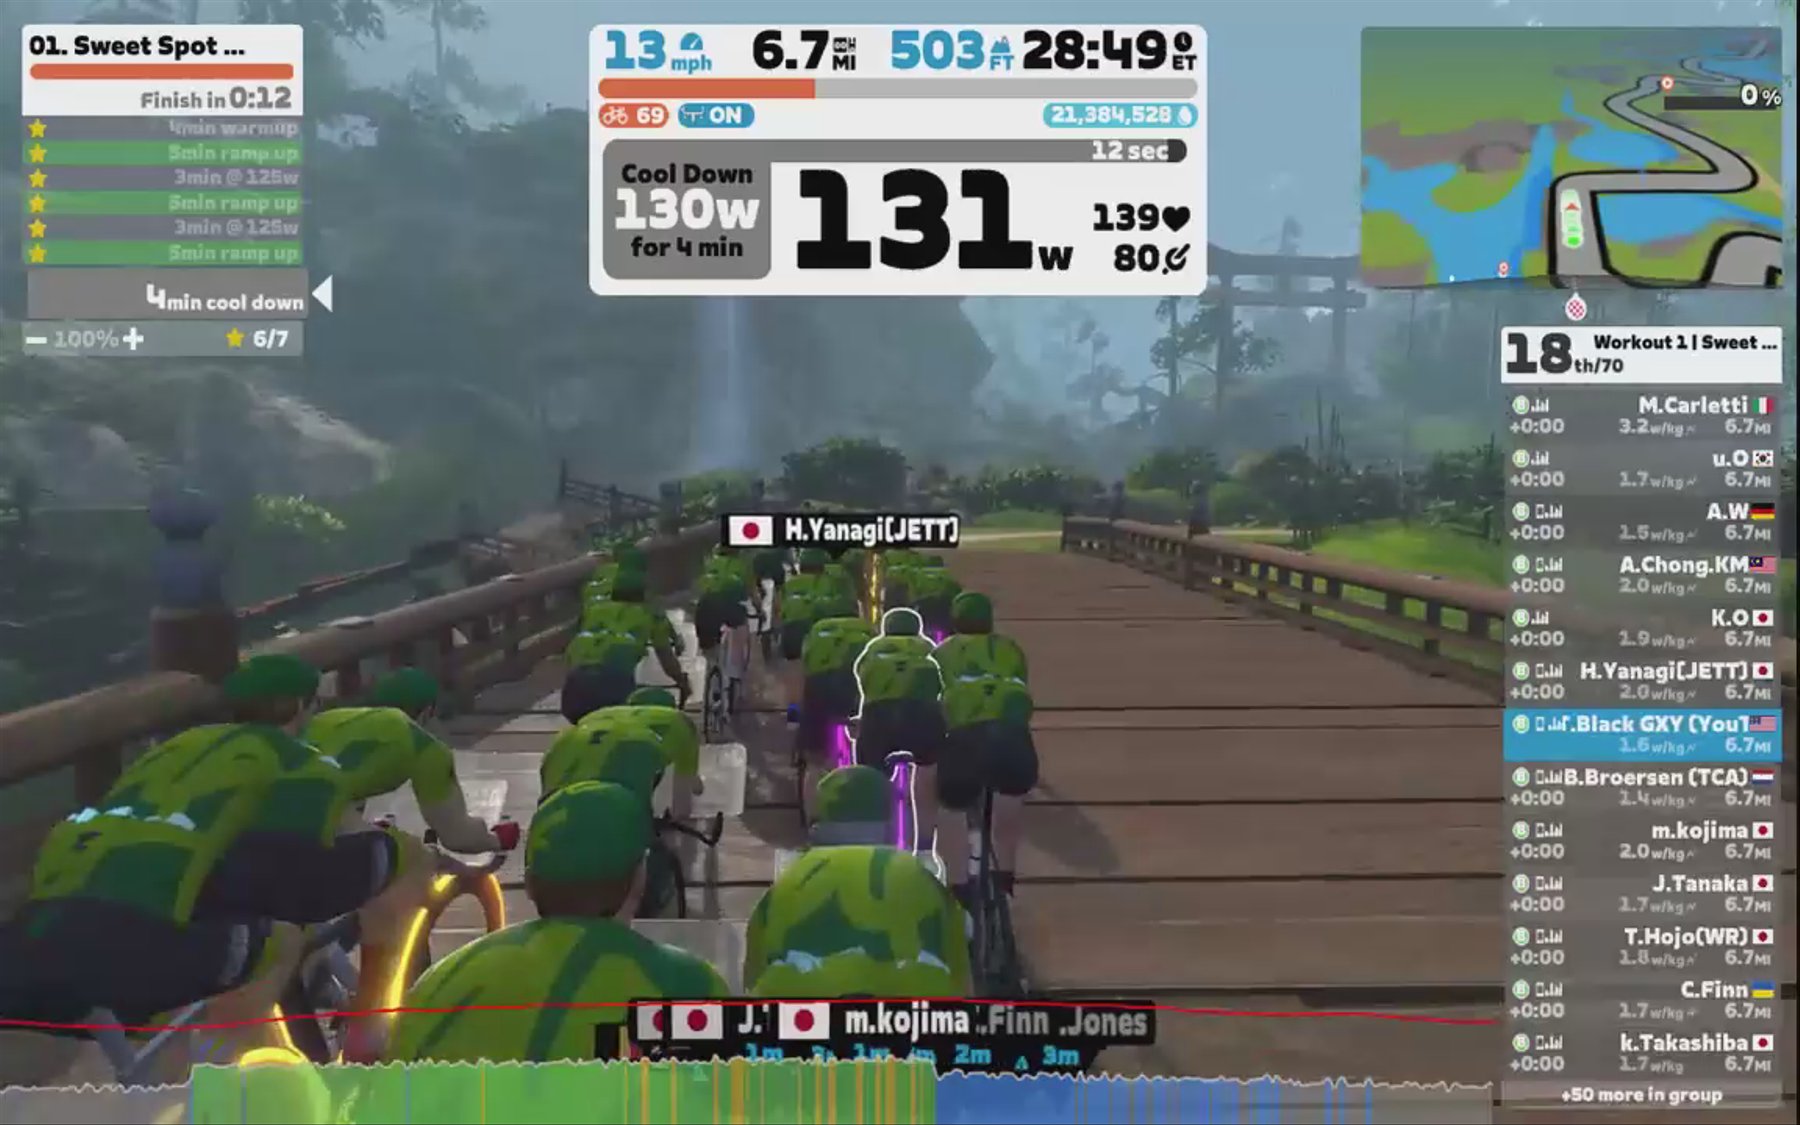 Zwift - Group Workout: Short - Sweet Spot Foundation  on Countryside Tour in Makuri Islands